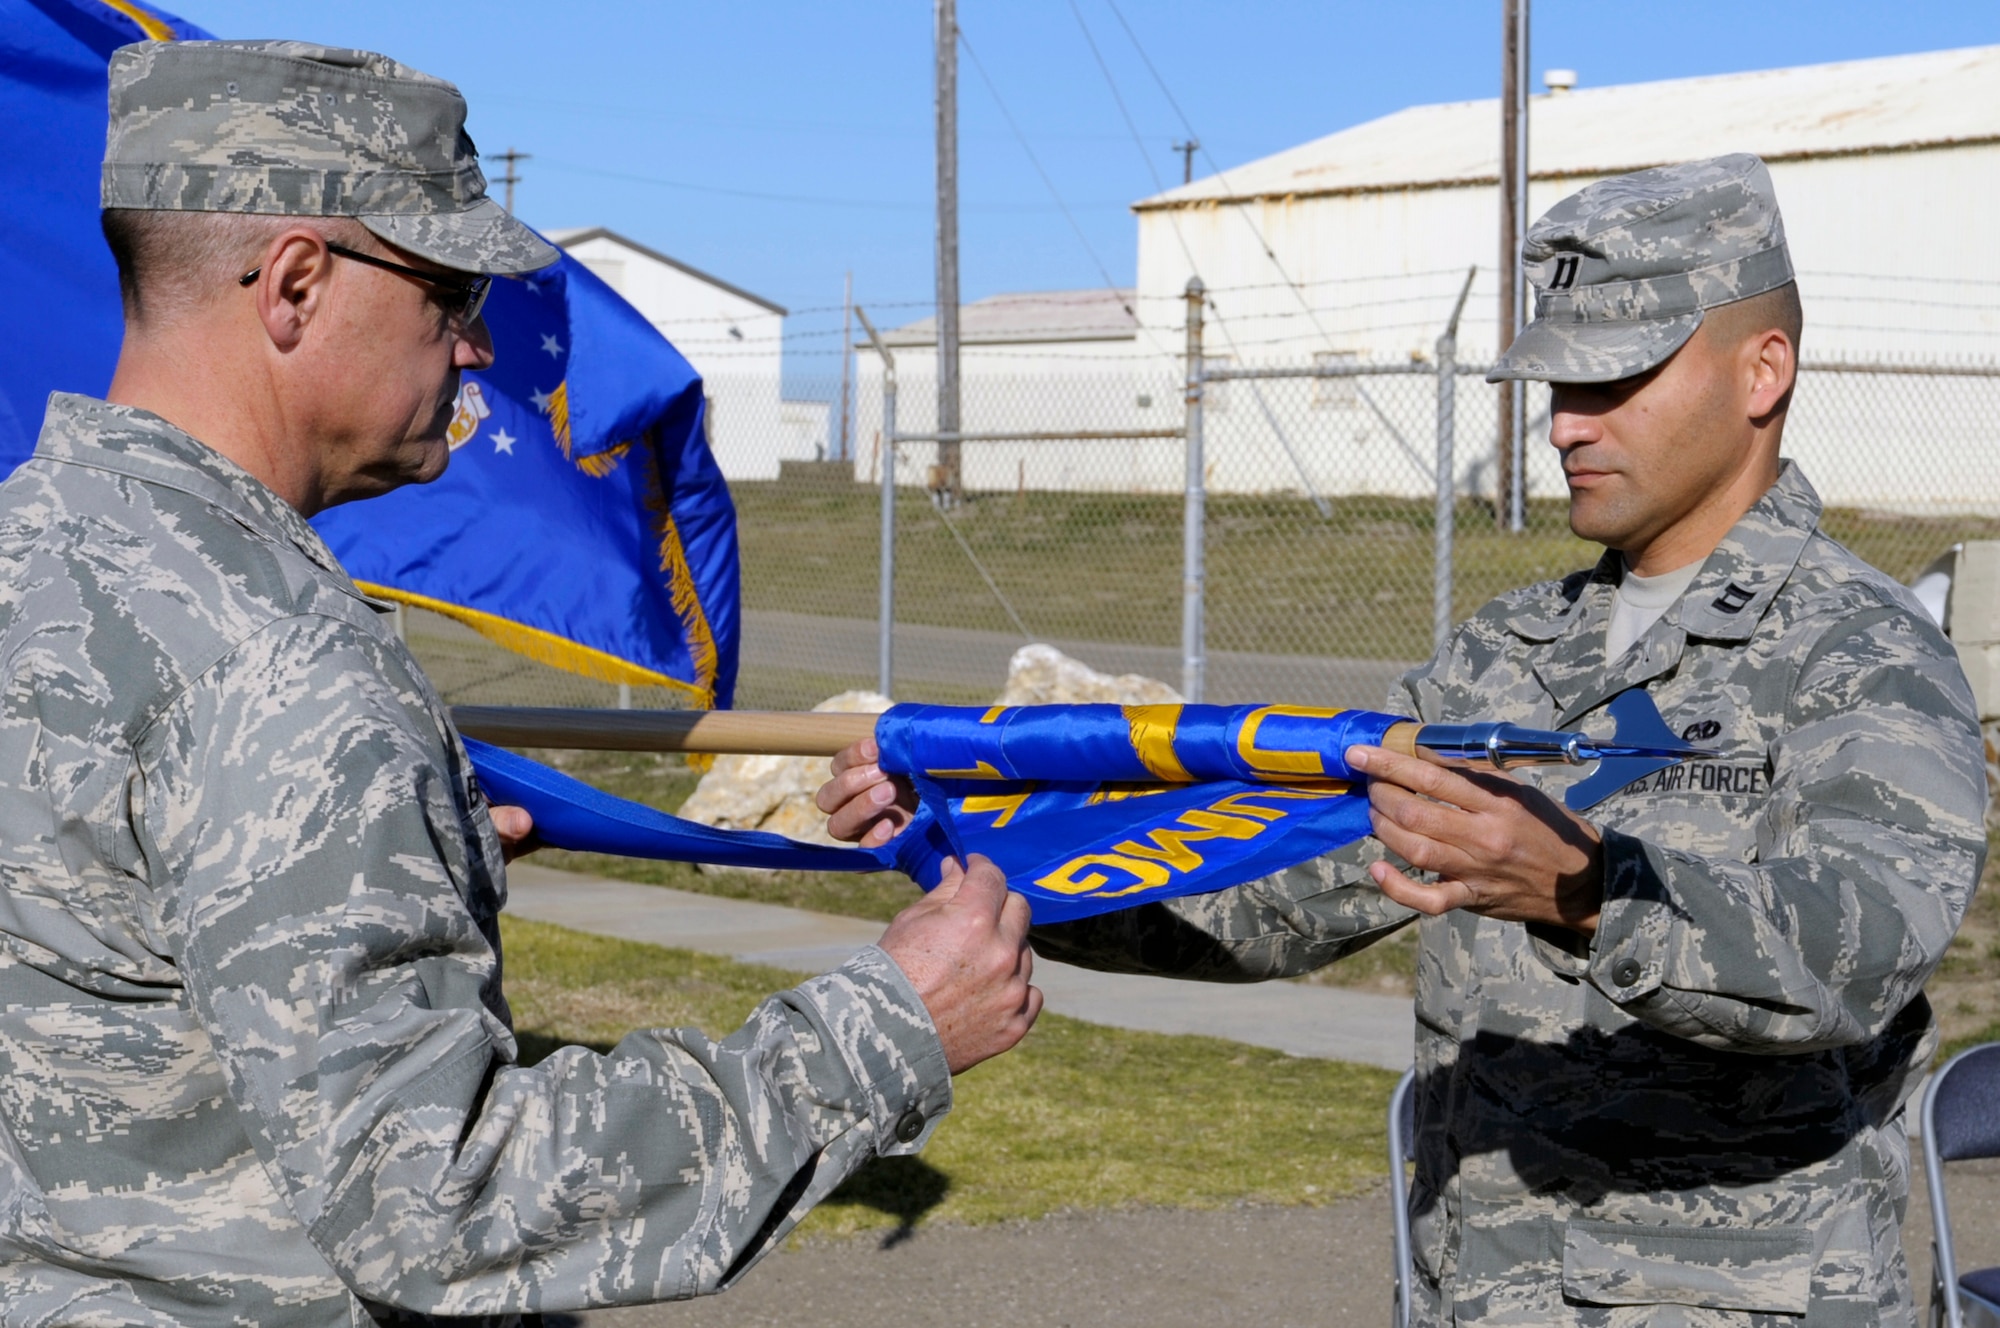 VANDENBERG AIR FORCE BASE, Calif. -- Col. Phillip Boroff, 798th Munitions Maintenance Group commander, and Capt. Angel Guerrero, 798th MUMG Detachment 1, maintenance operation officer, retire the detachment guidon during a deactivation ceremony here Tuesday, Dec. 6, 2011. The deactivation is due to a major command change and realignment of functions placing the command, control and authority for the operational mission with the 576th Flight Test Squadron here.
U.S. Air Force photo/Jerry E. Clemens Jr.)
 

 